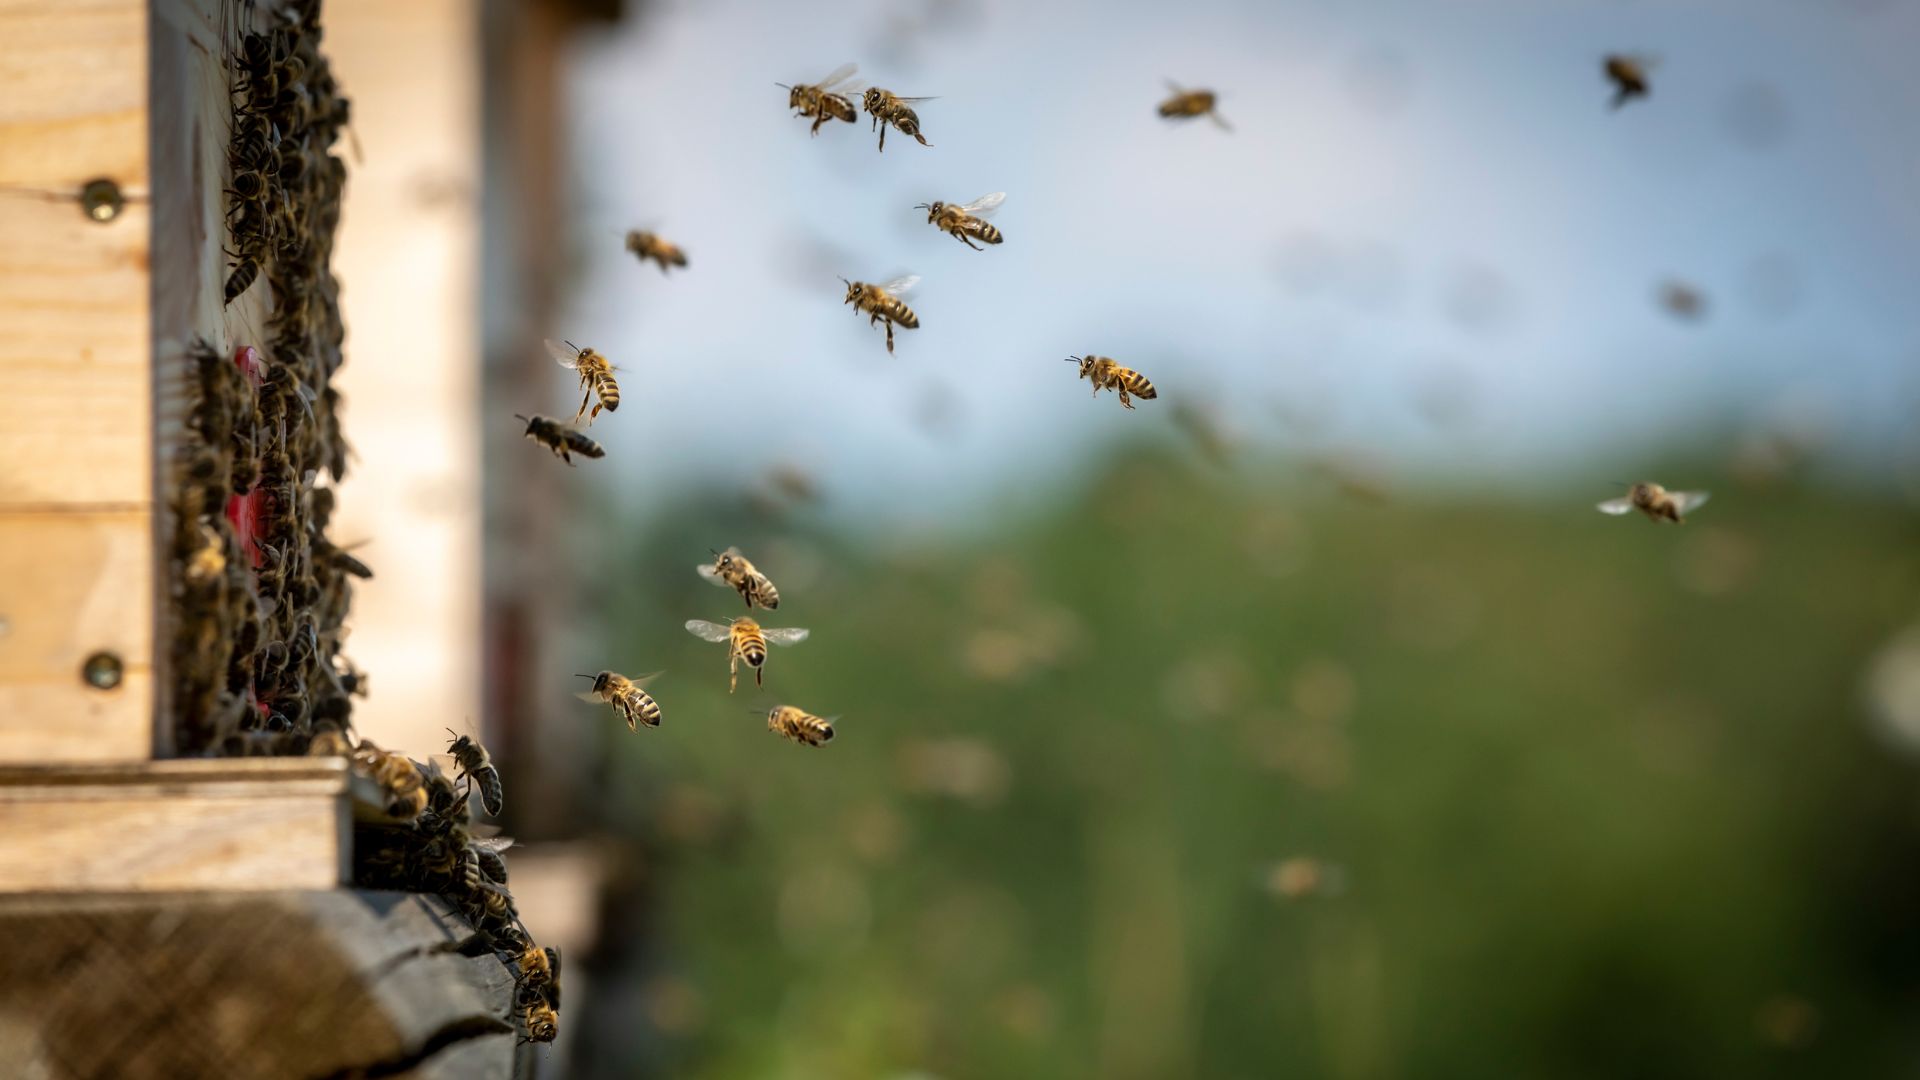 The nature of bees and honey is key to plant and human development